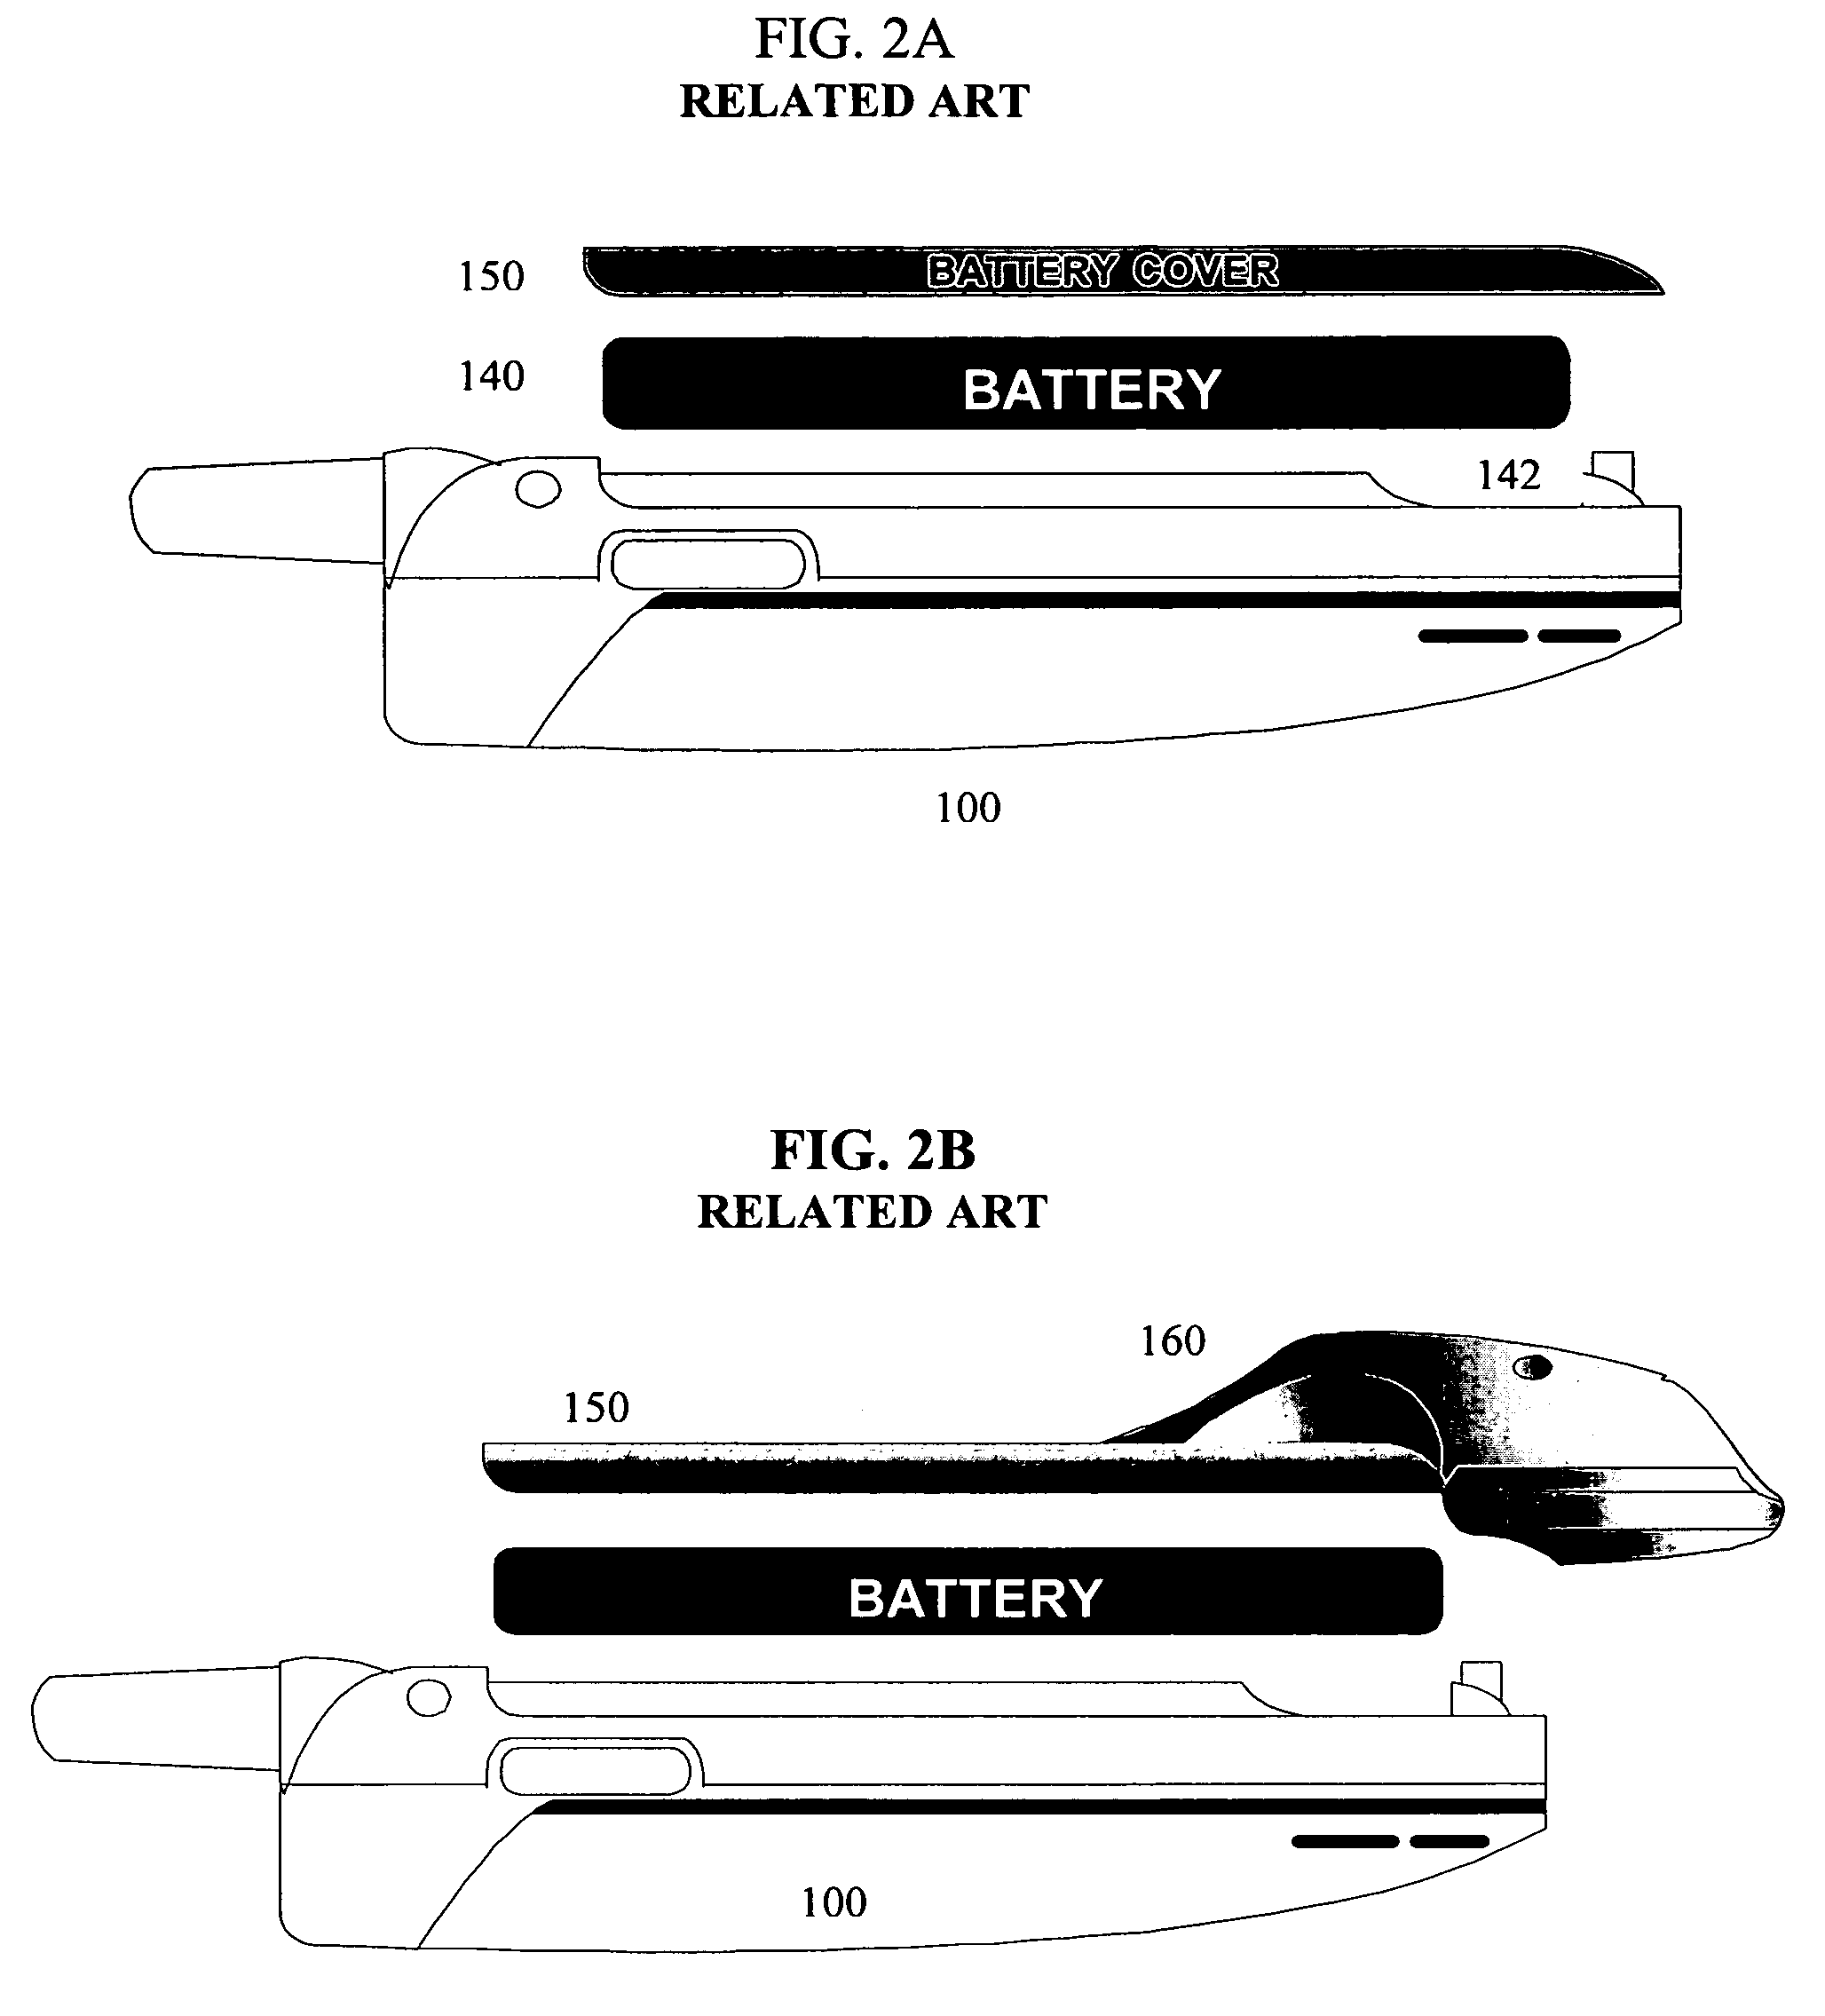 Application module for a personal communication device